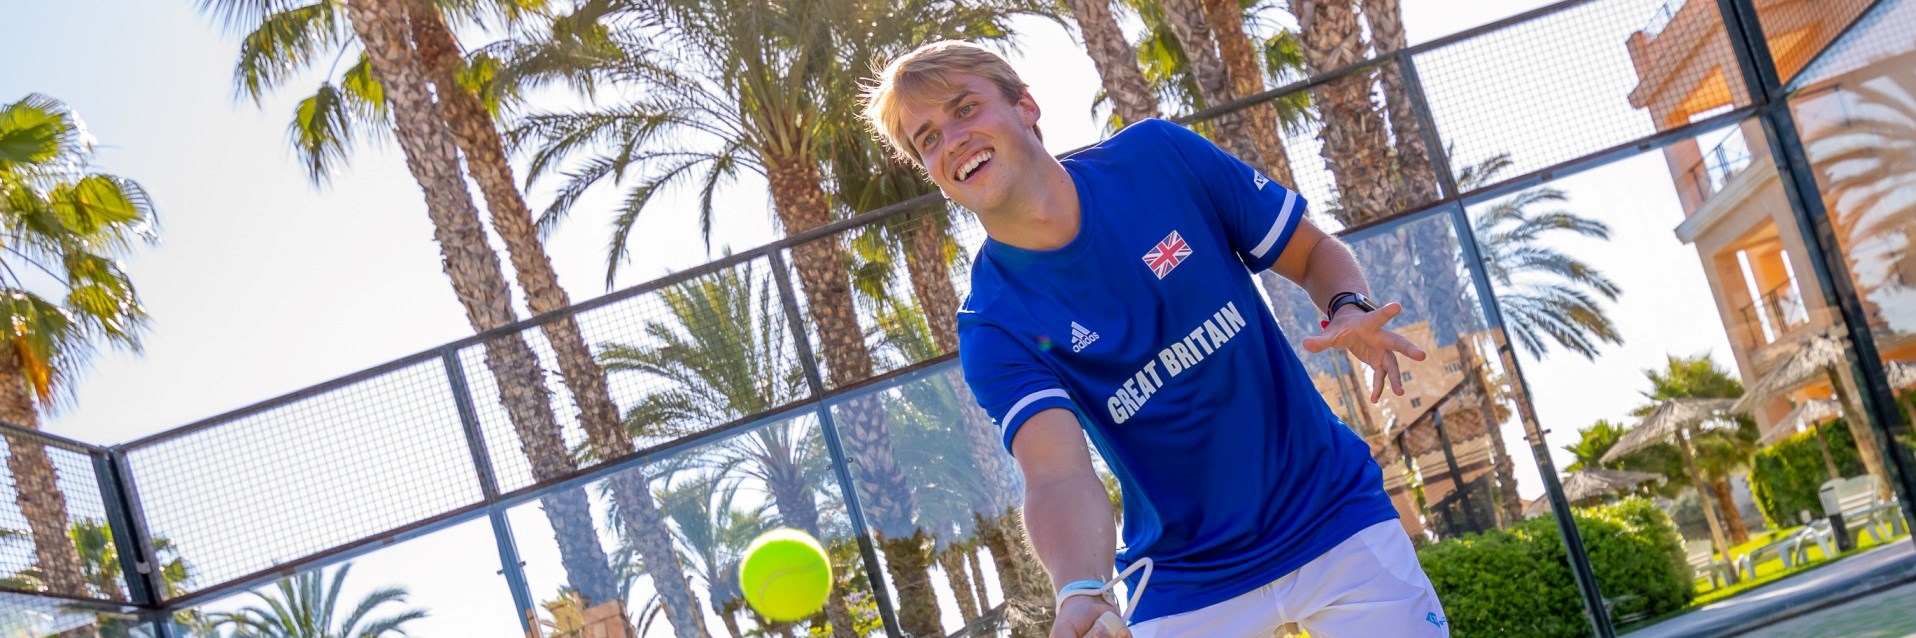 Sam Jones of Great Britain pictured in action on Padel courts